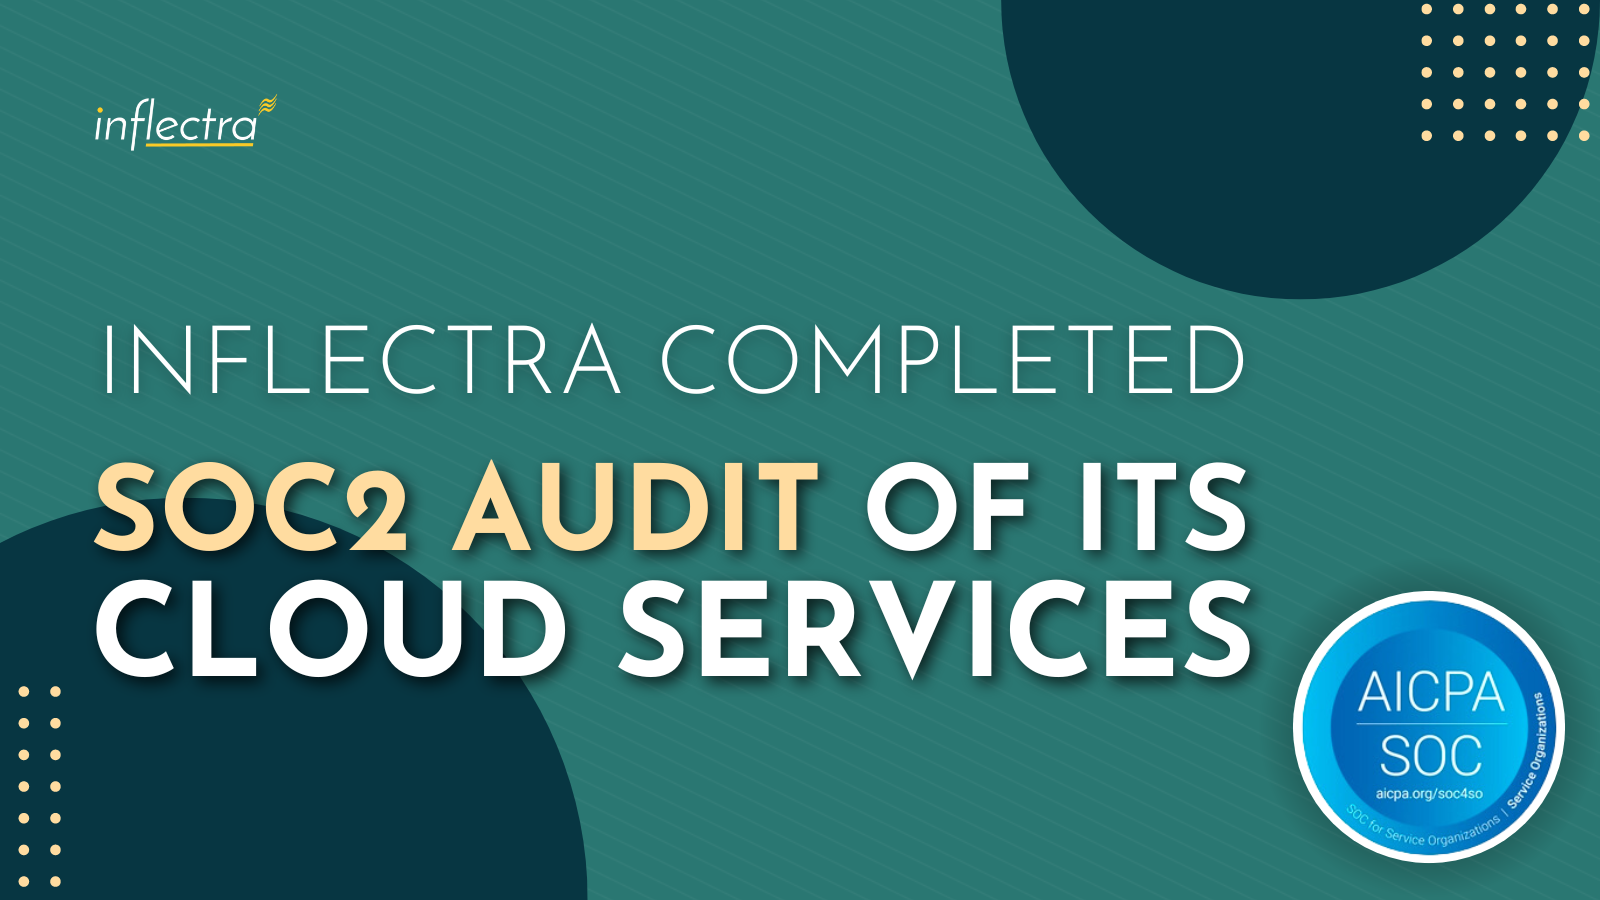 inflectra-completed-soc2-audit-of-Its-cloud-services-image